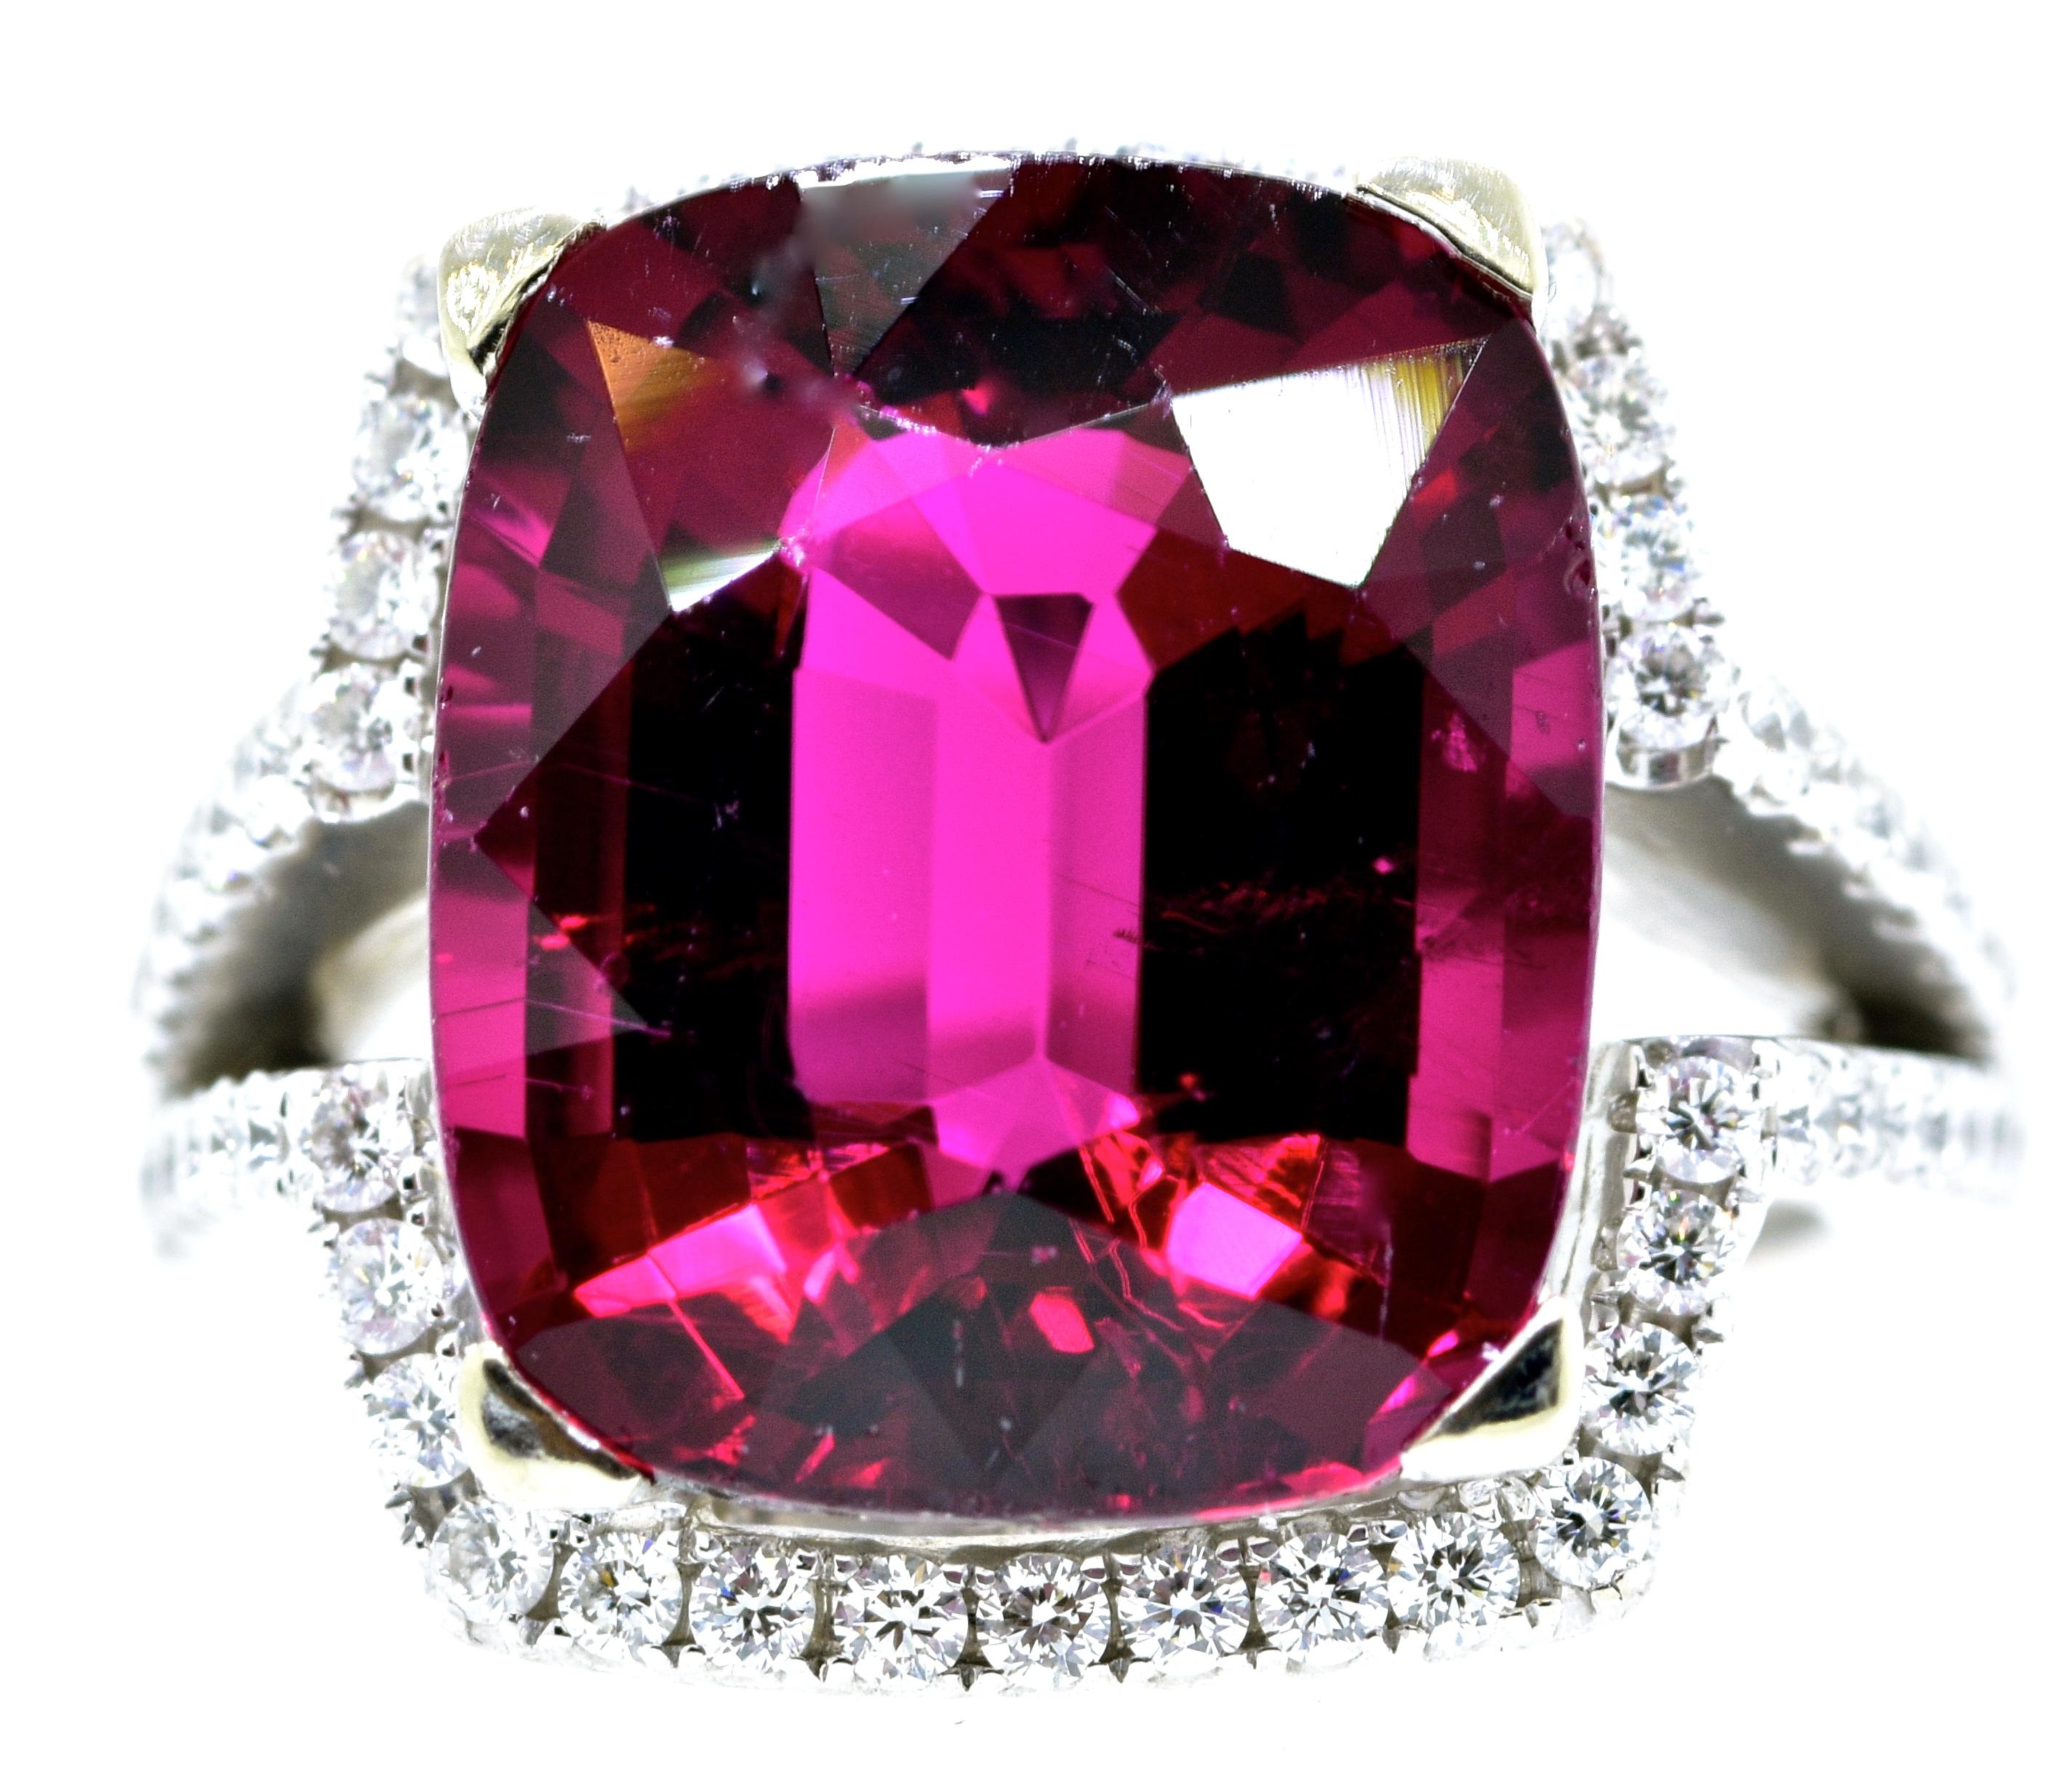 Rubelite is very fine and weighing 13.0 cts., exactly.  It displays a fine pure vivid red color, has fine clarity and a pleasing shape.  The color is a vivid raspberry, with fine clarity with no 